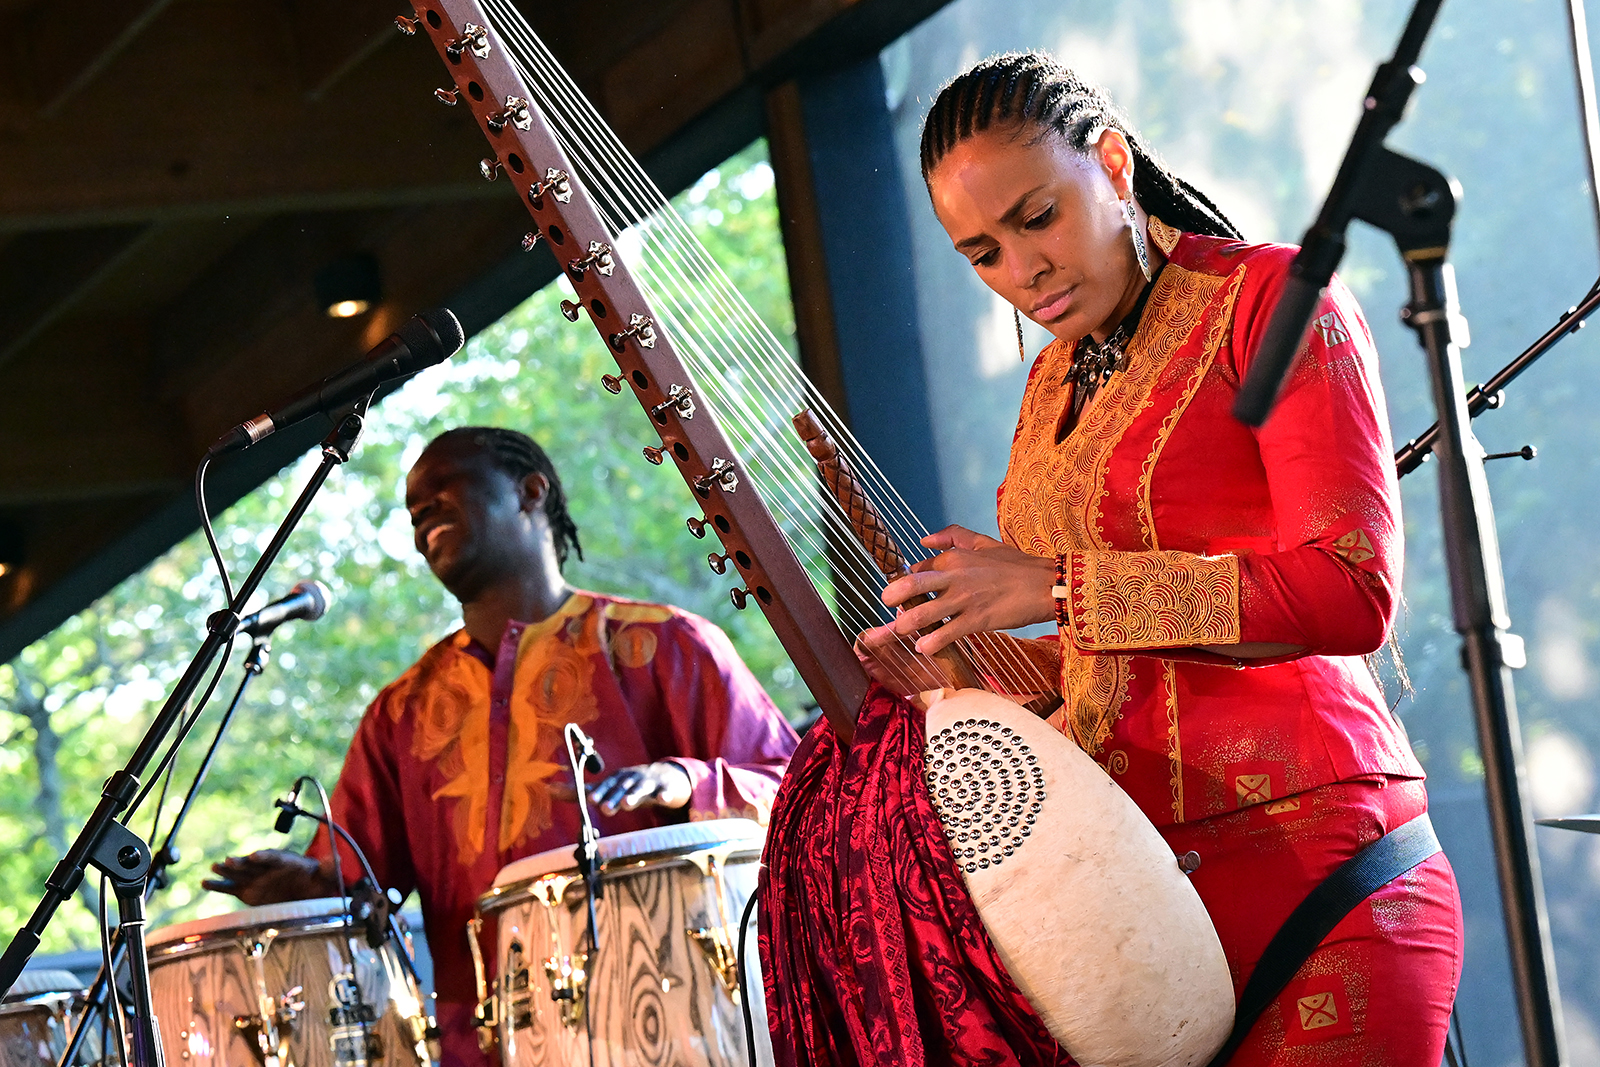 Mamadou Sarr and Sona Jobarteh perform during the 2023 Savannah Music Festival, Georgia. Photo by R. Diamond/Getty Images